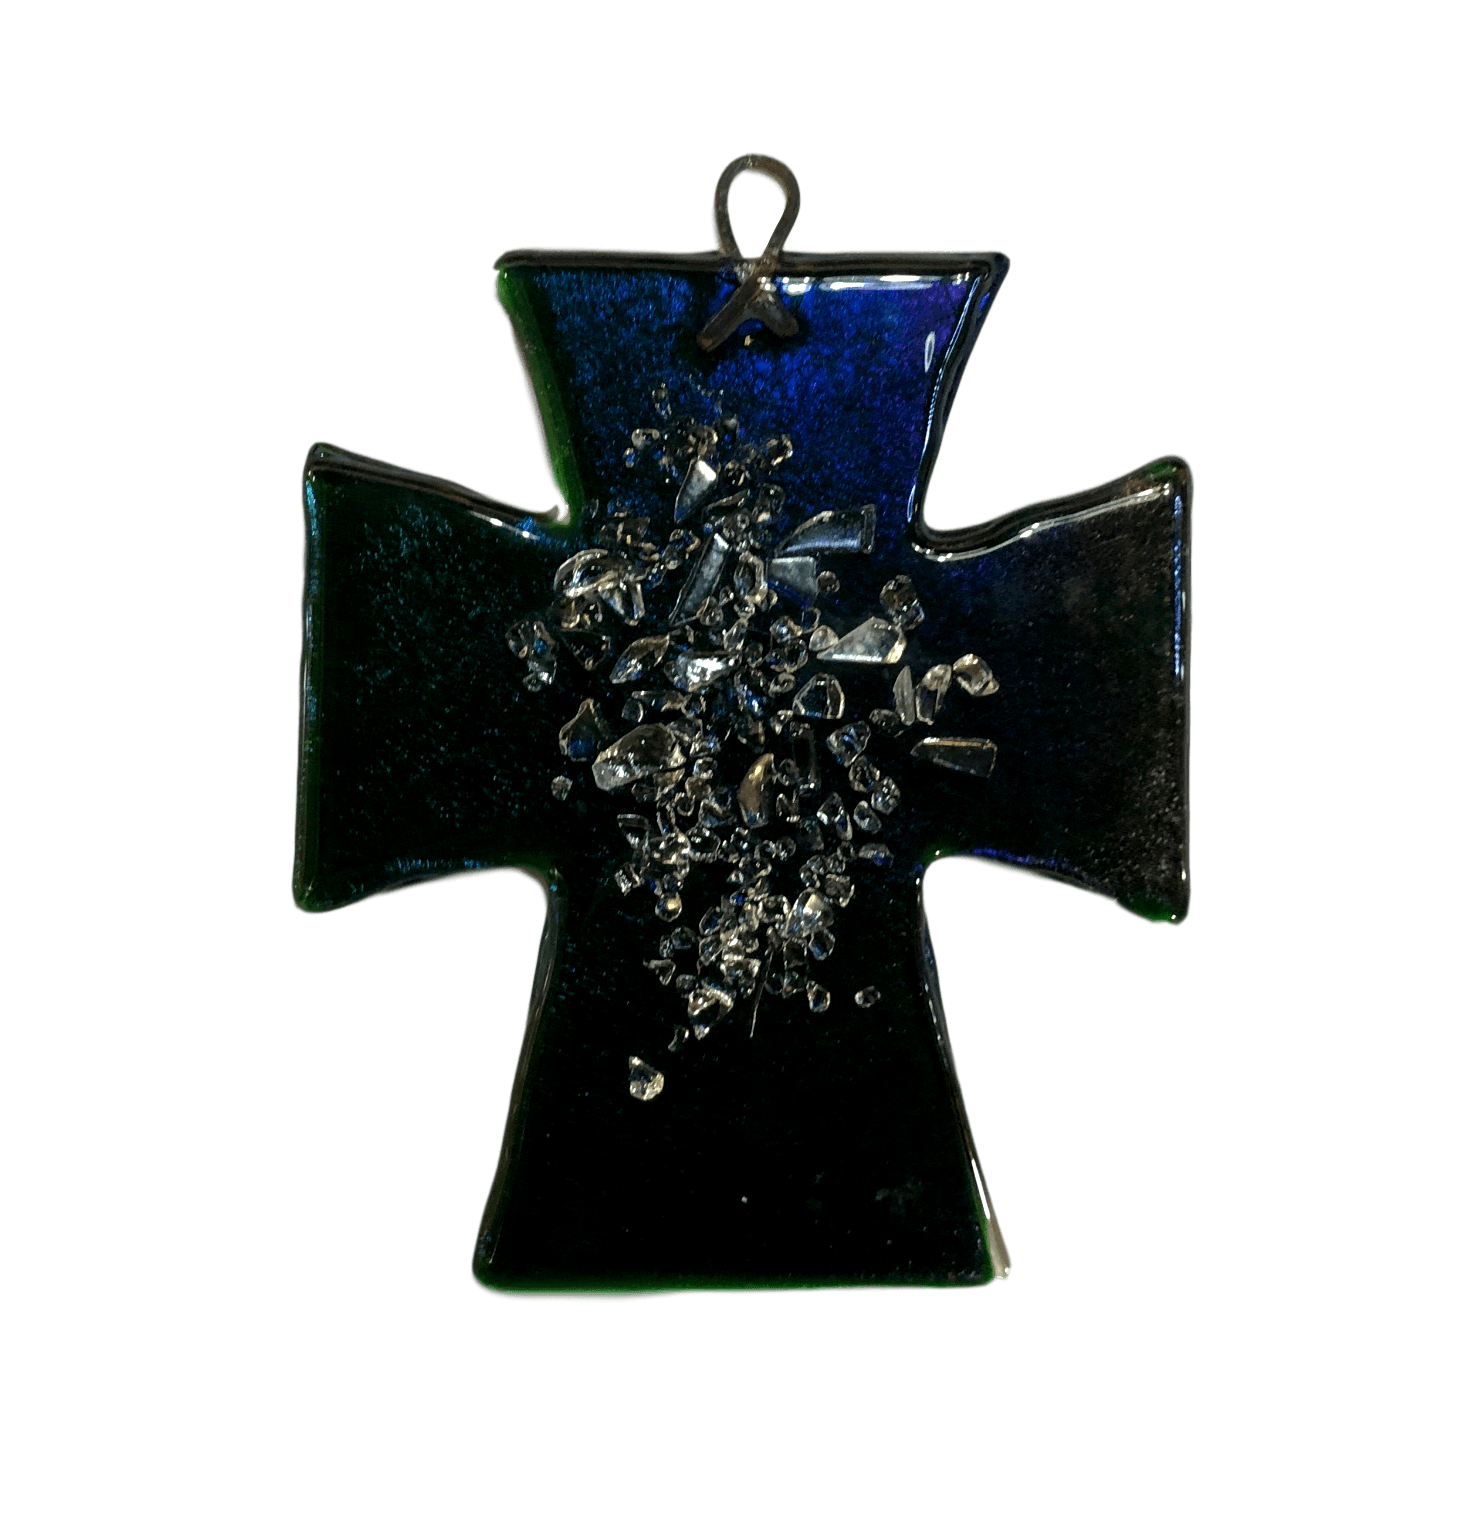 Cross Fused Glass Handcrafted Local New Mexico Artist Dichronic 7" x 6" - Ysleta Mission Gift Shop- VOTED El Paso's Best Gift Shop